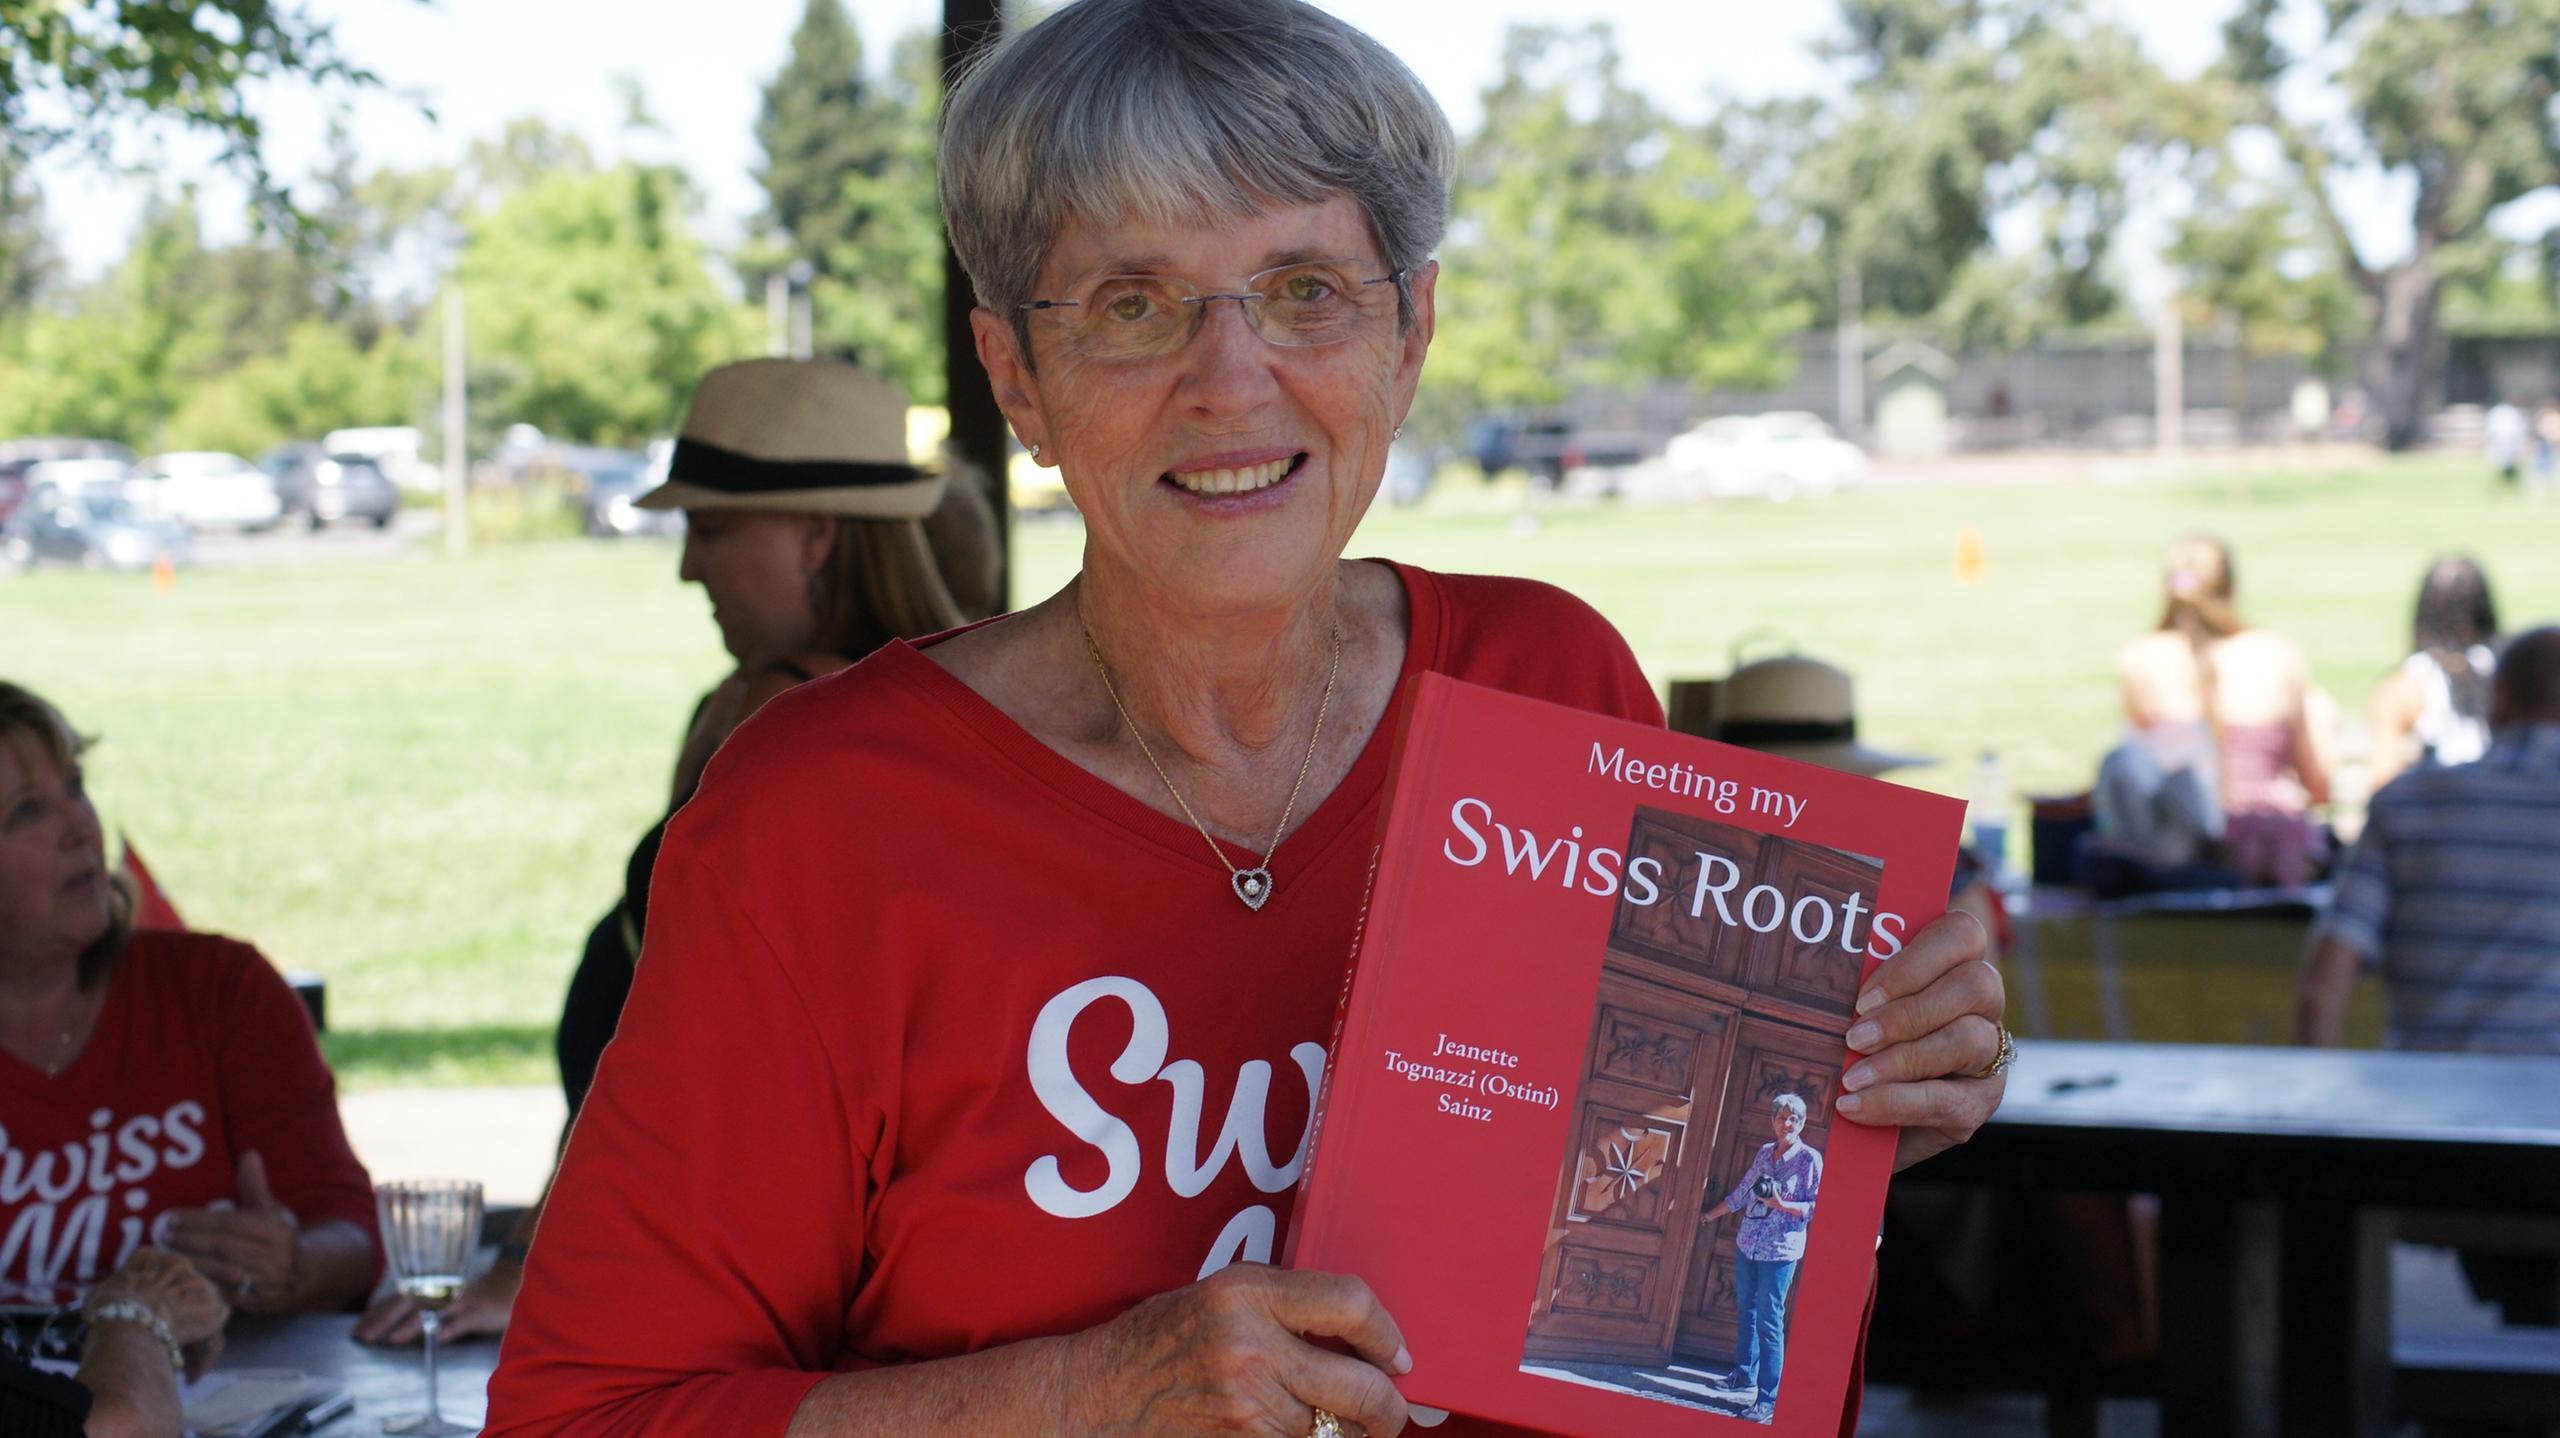 Jeanette holding up her Swiss Roots book